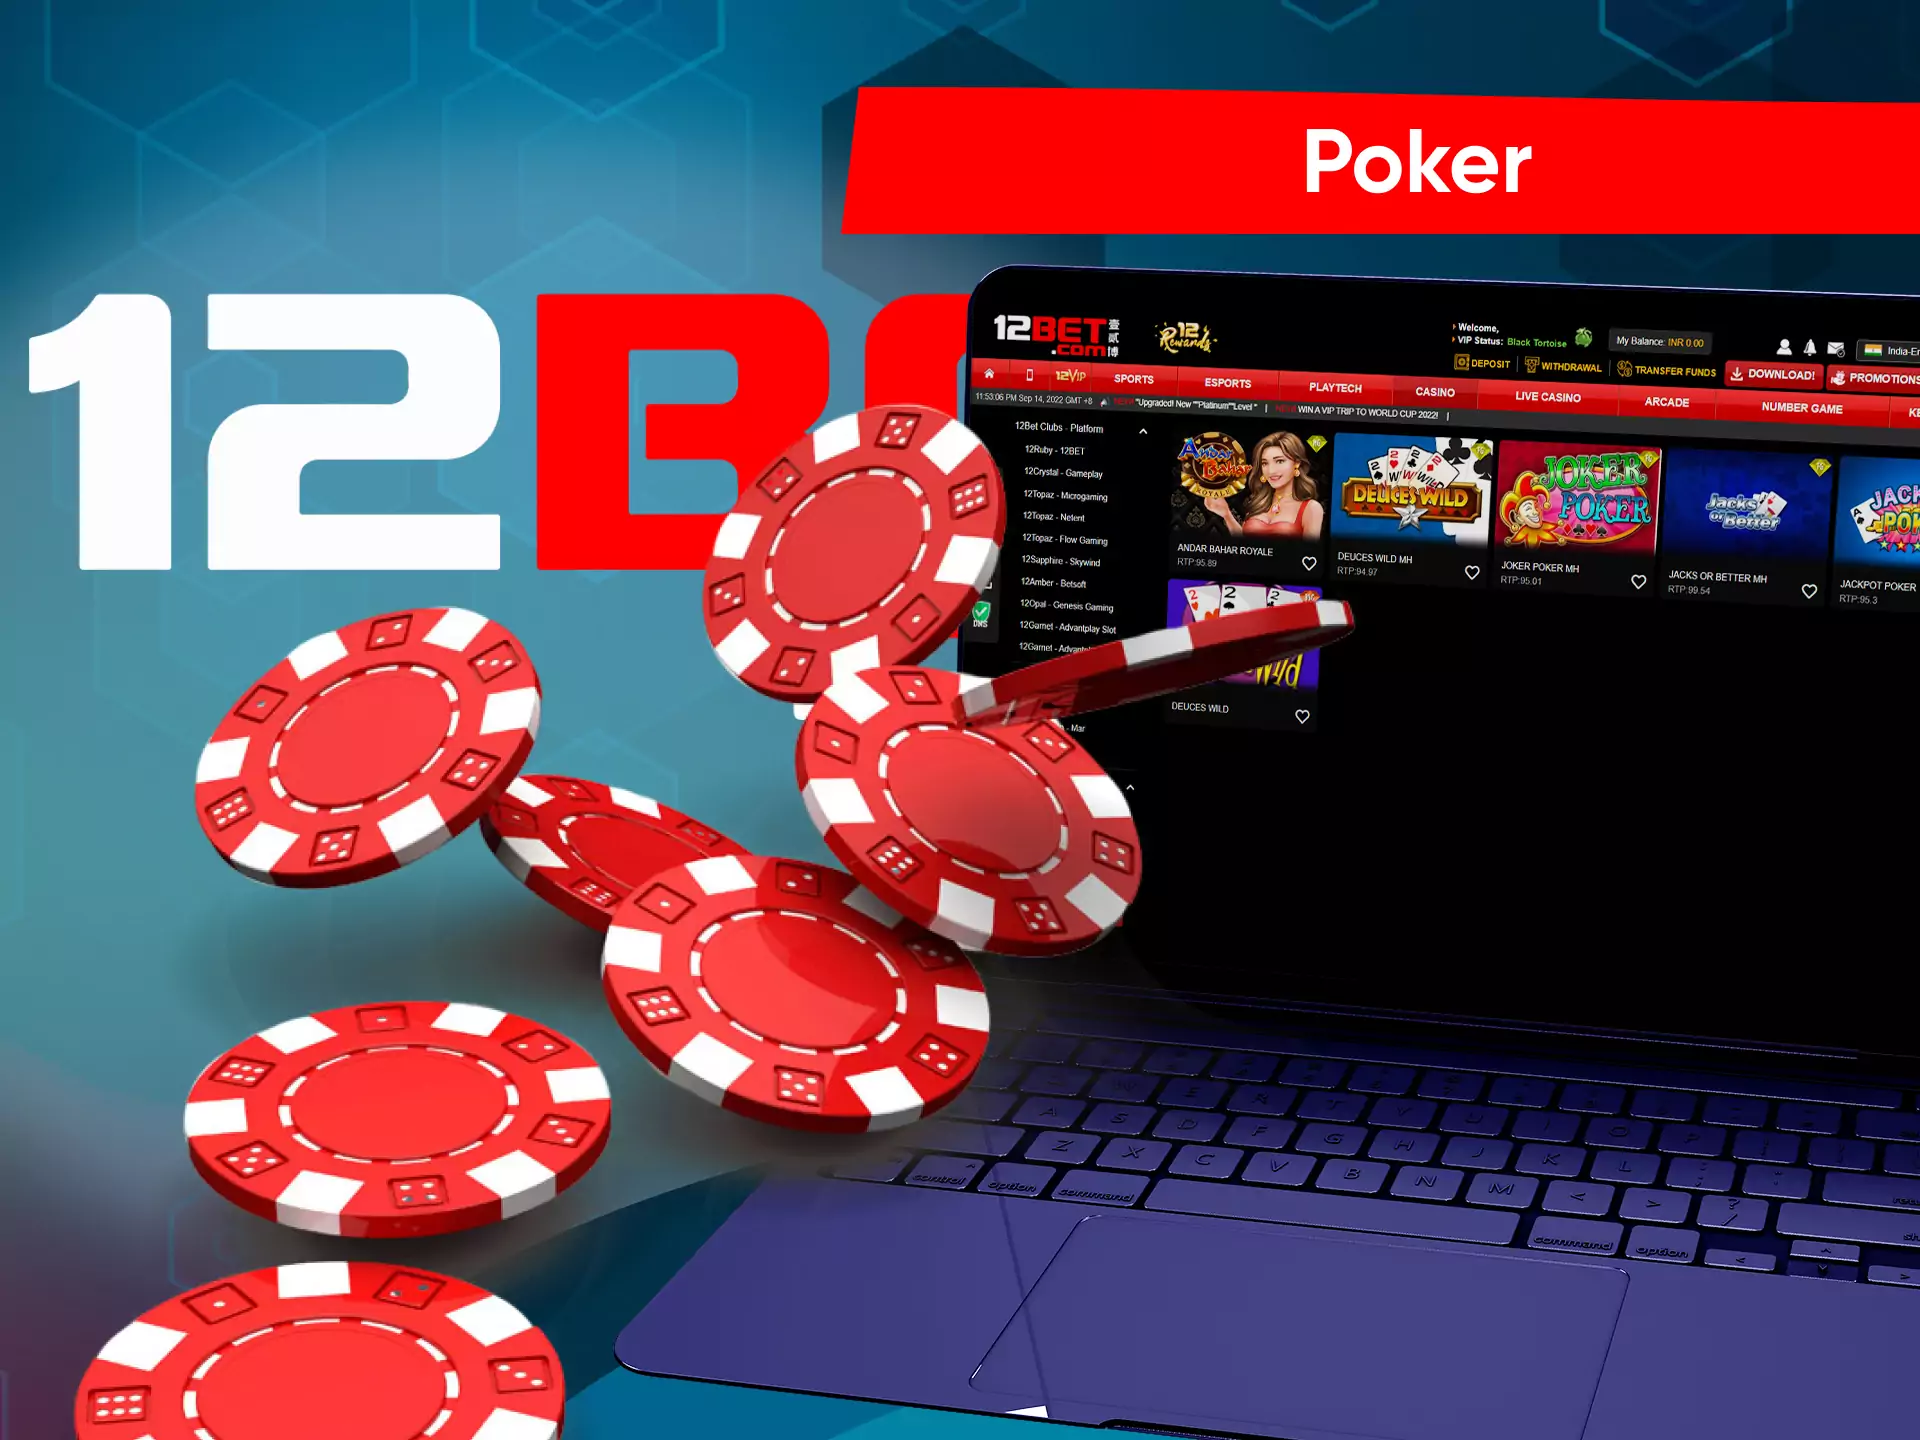 In the 12bet casino, you can meet real dealers and other users playing poker.